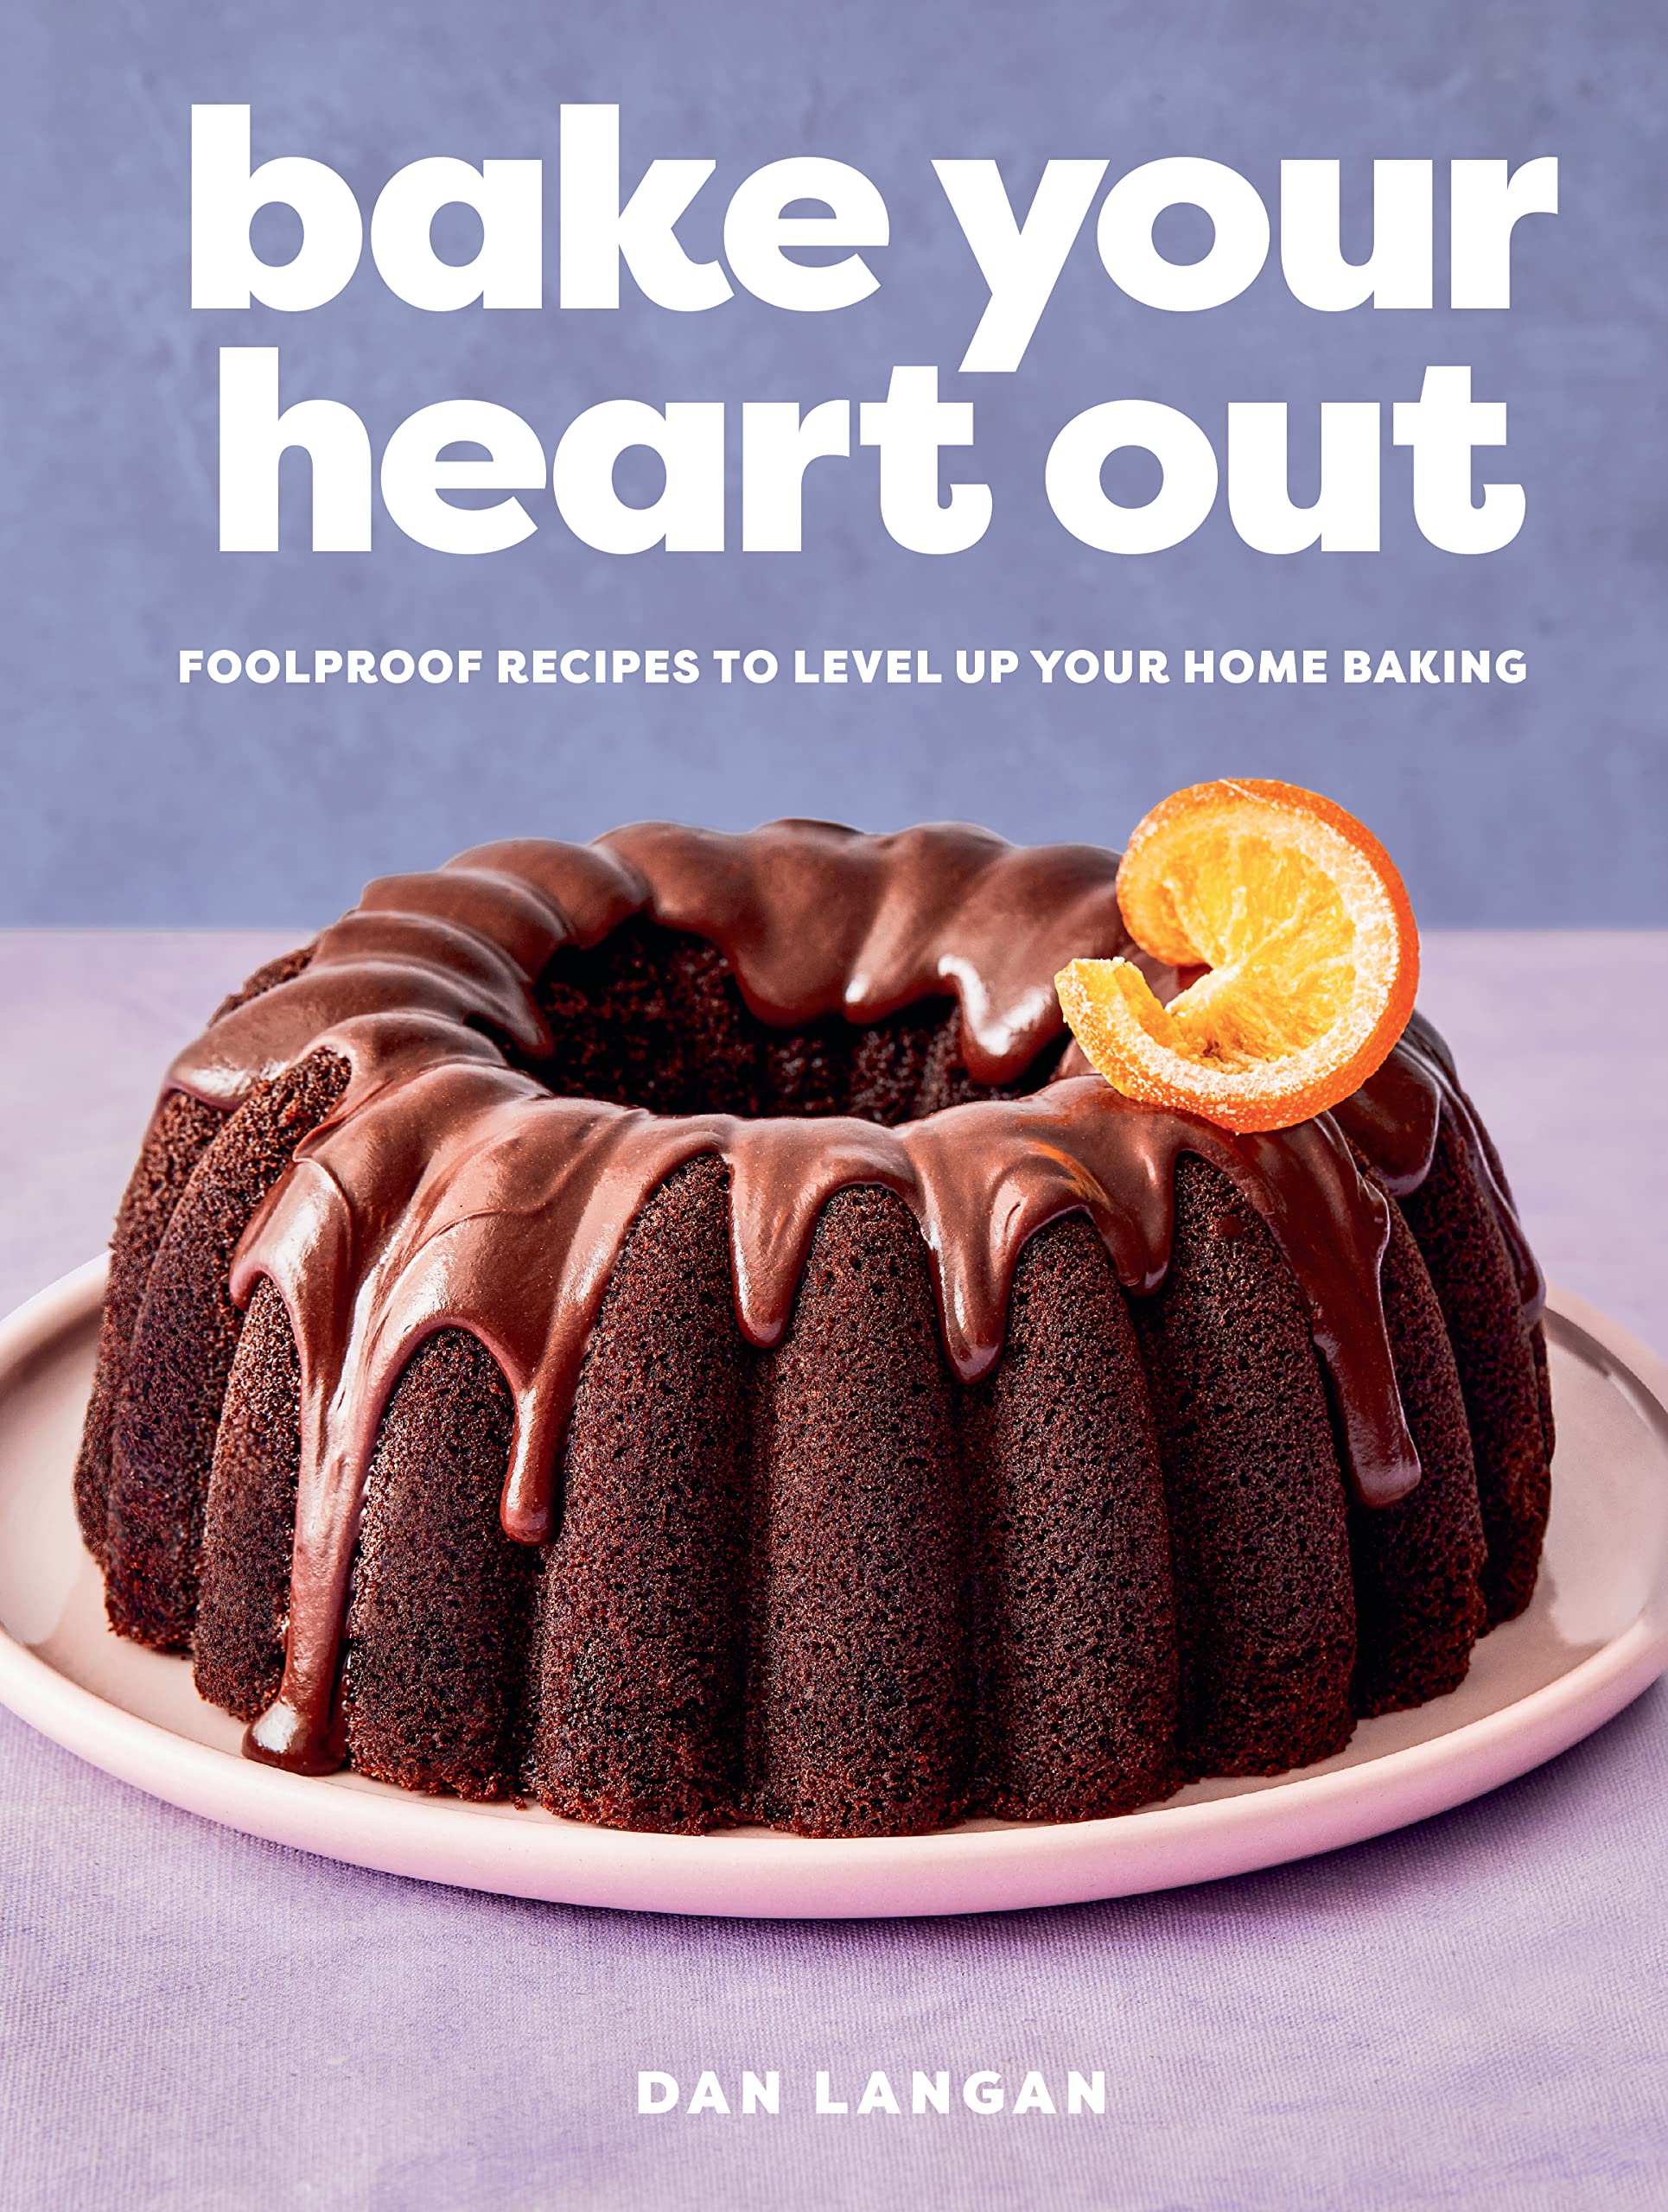 Bake Your Heart Out: Foolproof Recipes to Level Up Your Home Baking (Dan Langan) *Signed*